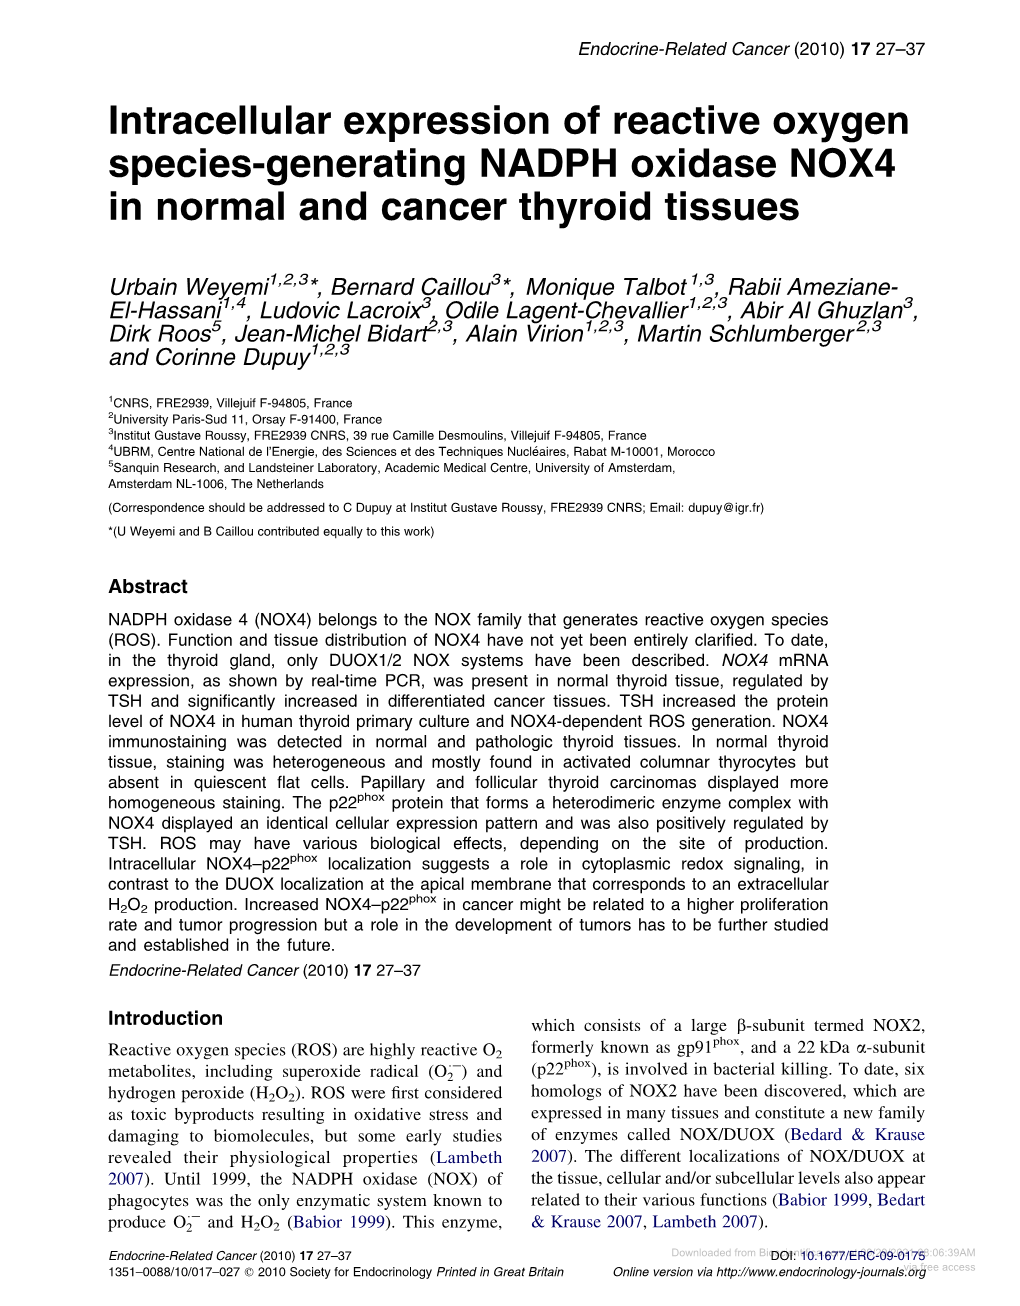 Intracellular Expression of Reactive Oxygen Species-Generating NADPH Oxidase NOX4 in Normal and Cancer Thyroid Tissues